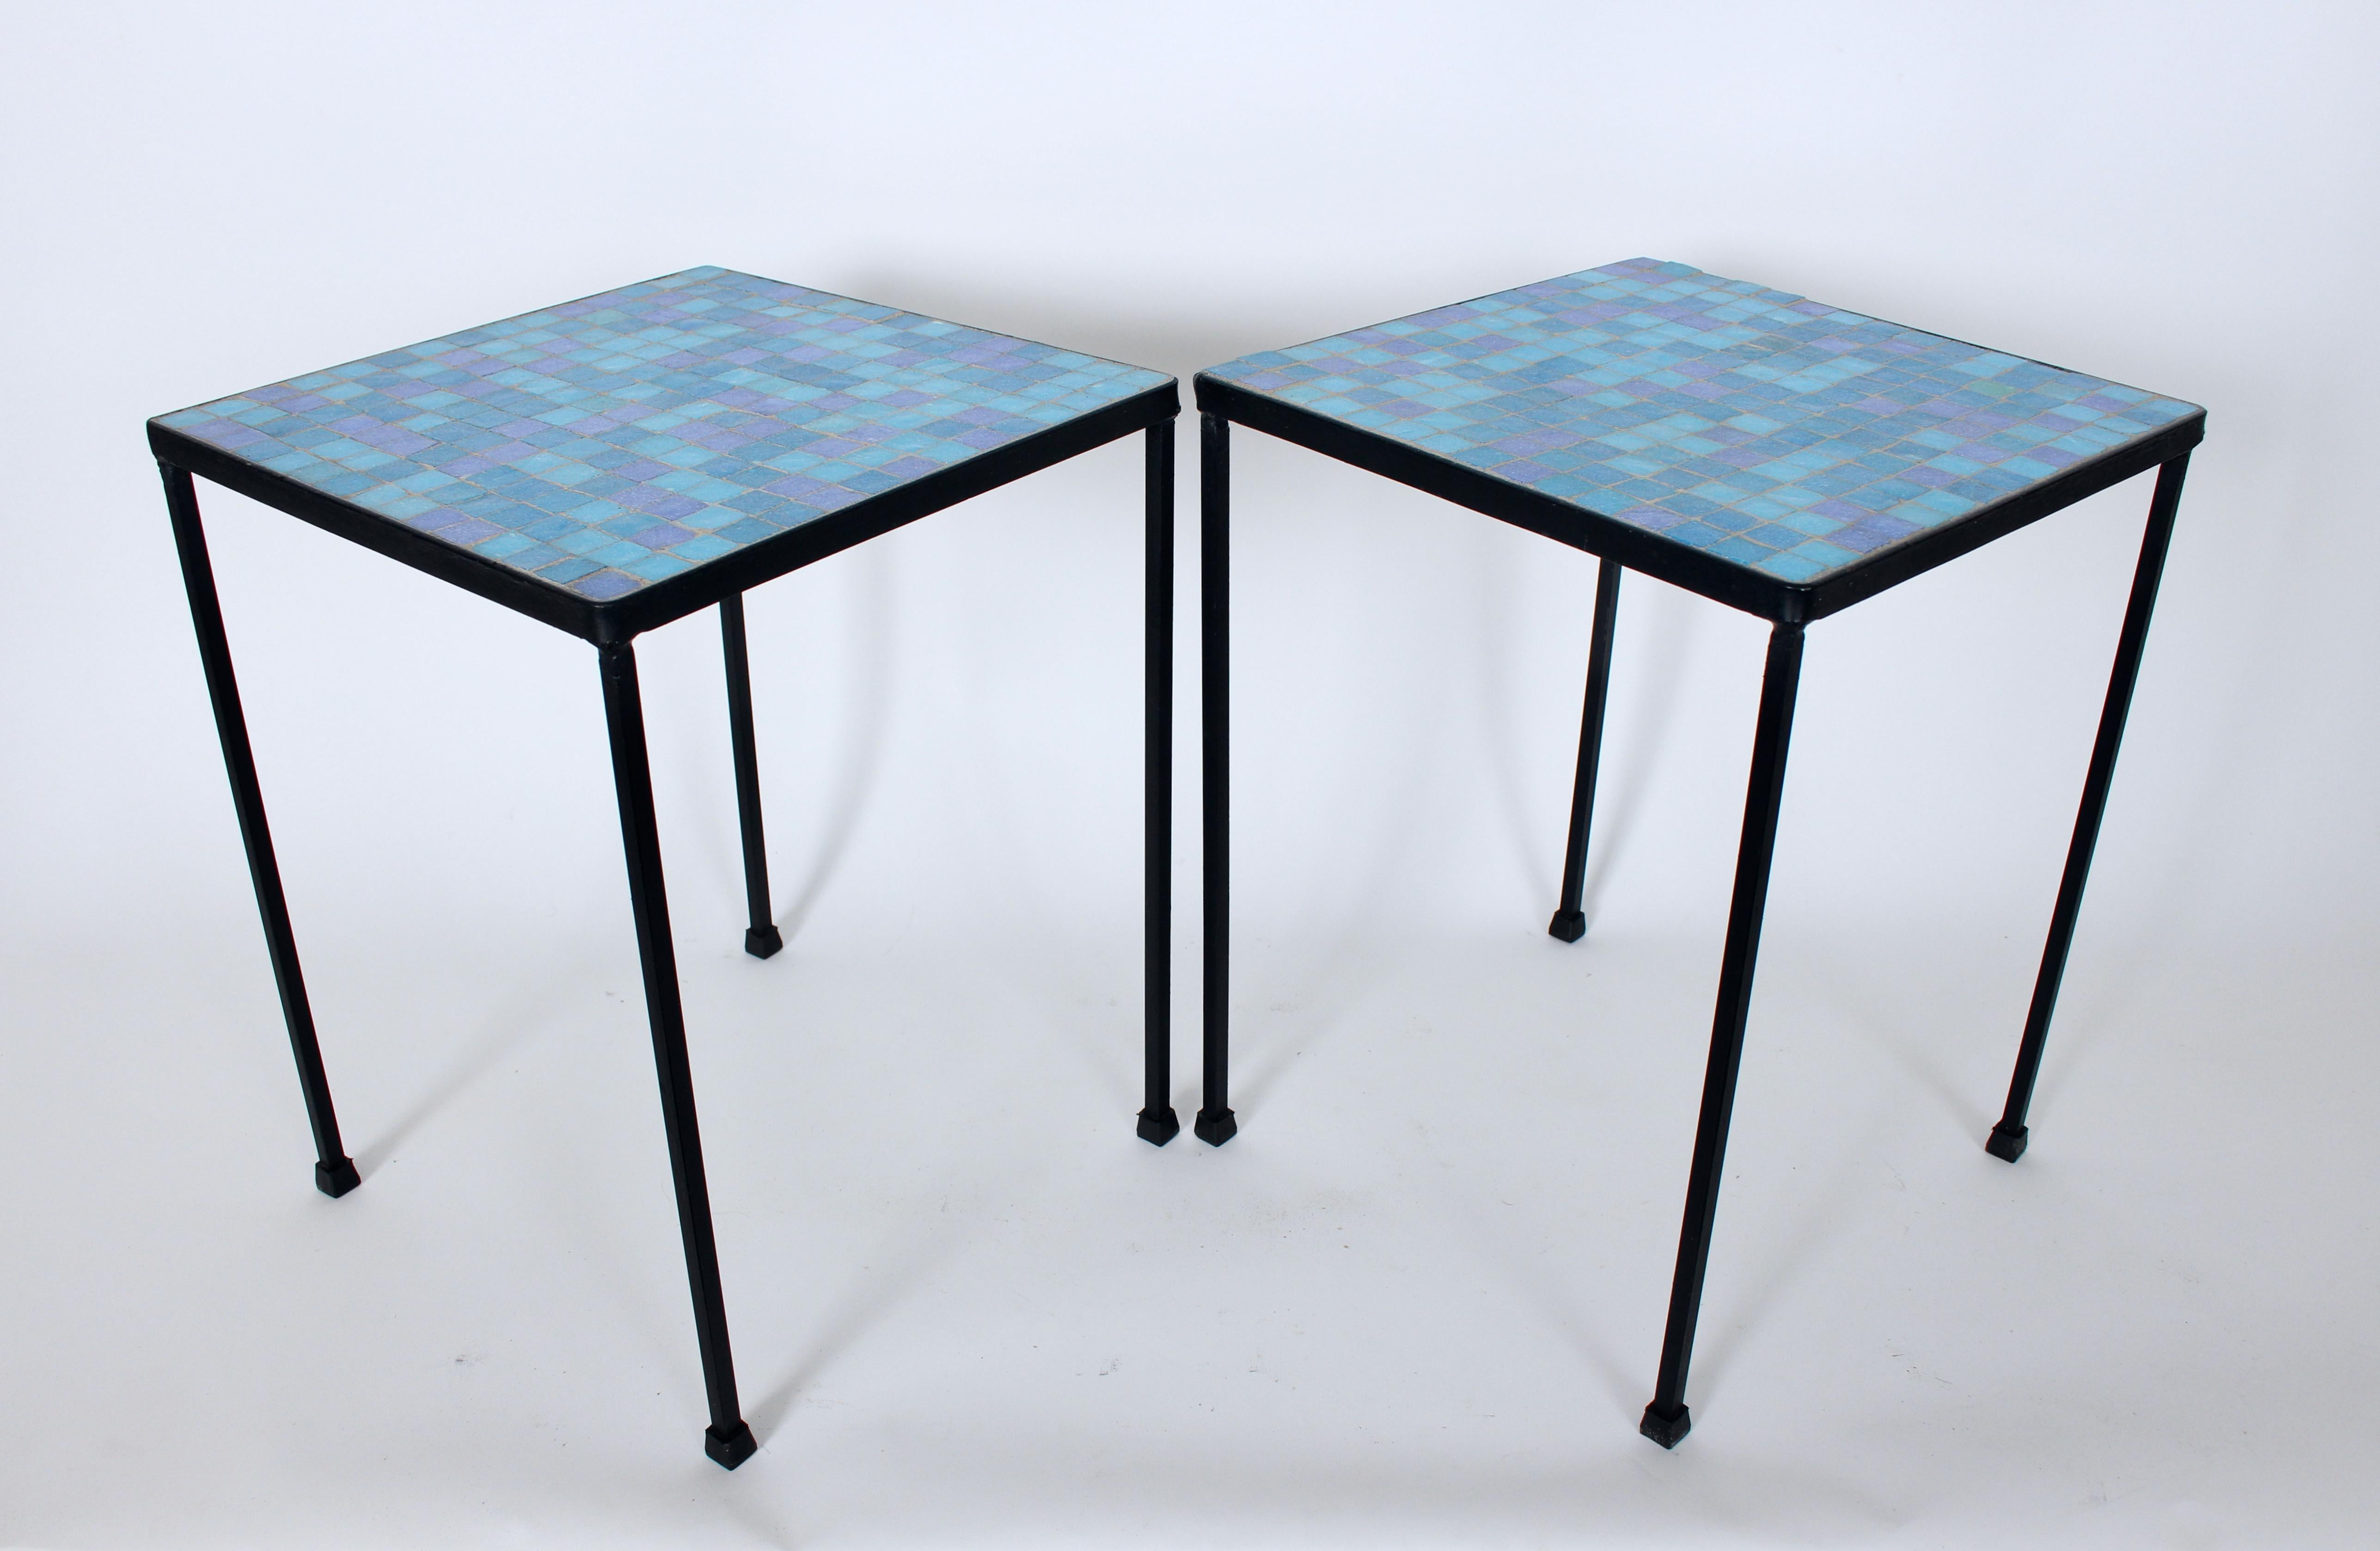 Pair Wrought Iron and Terrazzo Tile End Tables in Aqua, Royal Blue & Violet. Featuring sturdy open Black Wrought Iron solid square rod frameworks, mosaic surfaces with reflective 1 inch square glass Terrazzo tile in Deep Blue, Turquoise and Violet